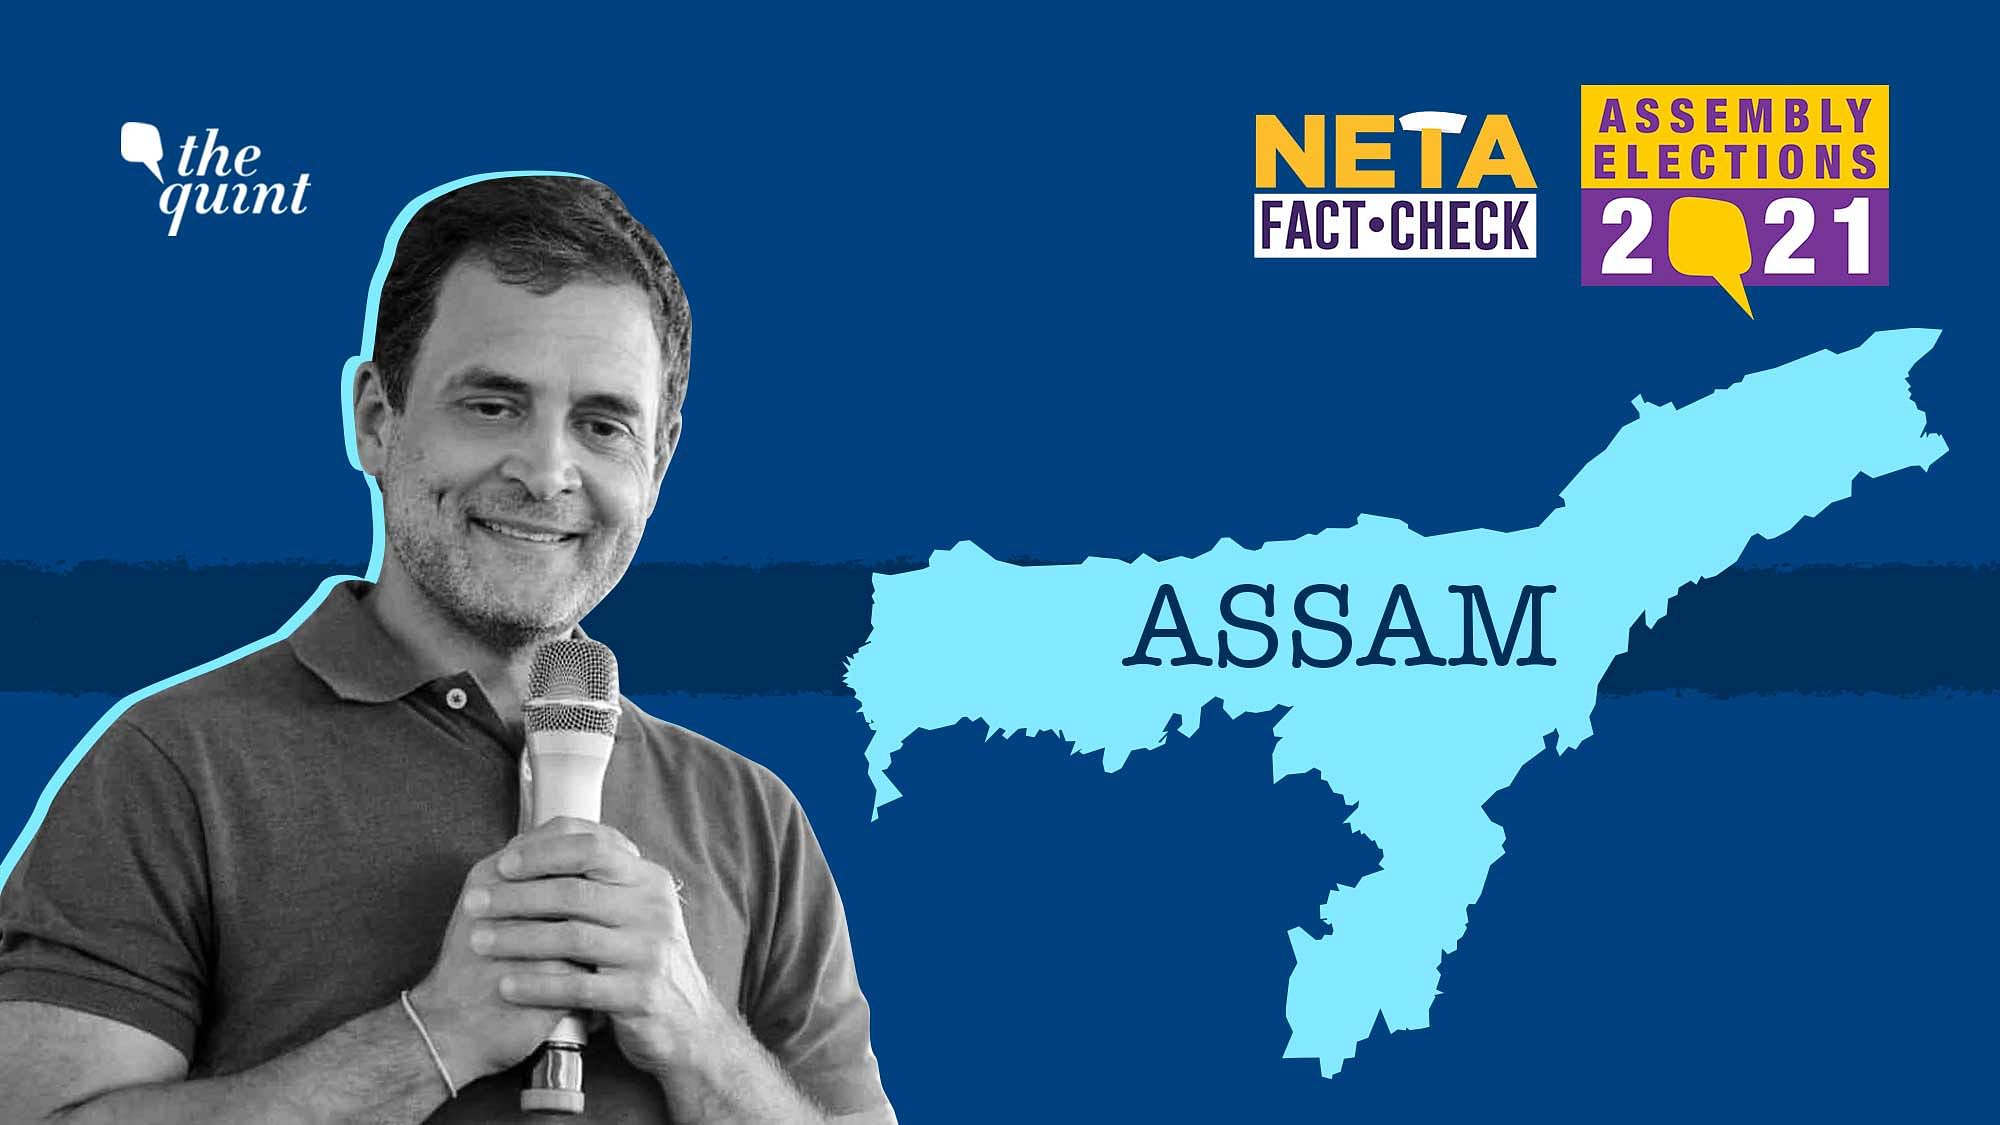 Congress leader Rahul Gandhi falsely claimed that Assam has the highest unemployment rate in the country.